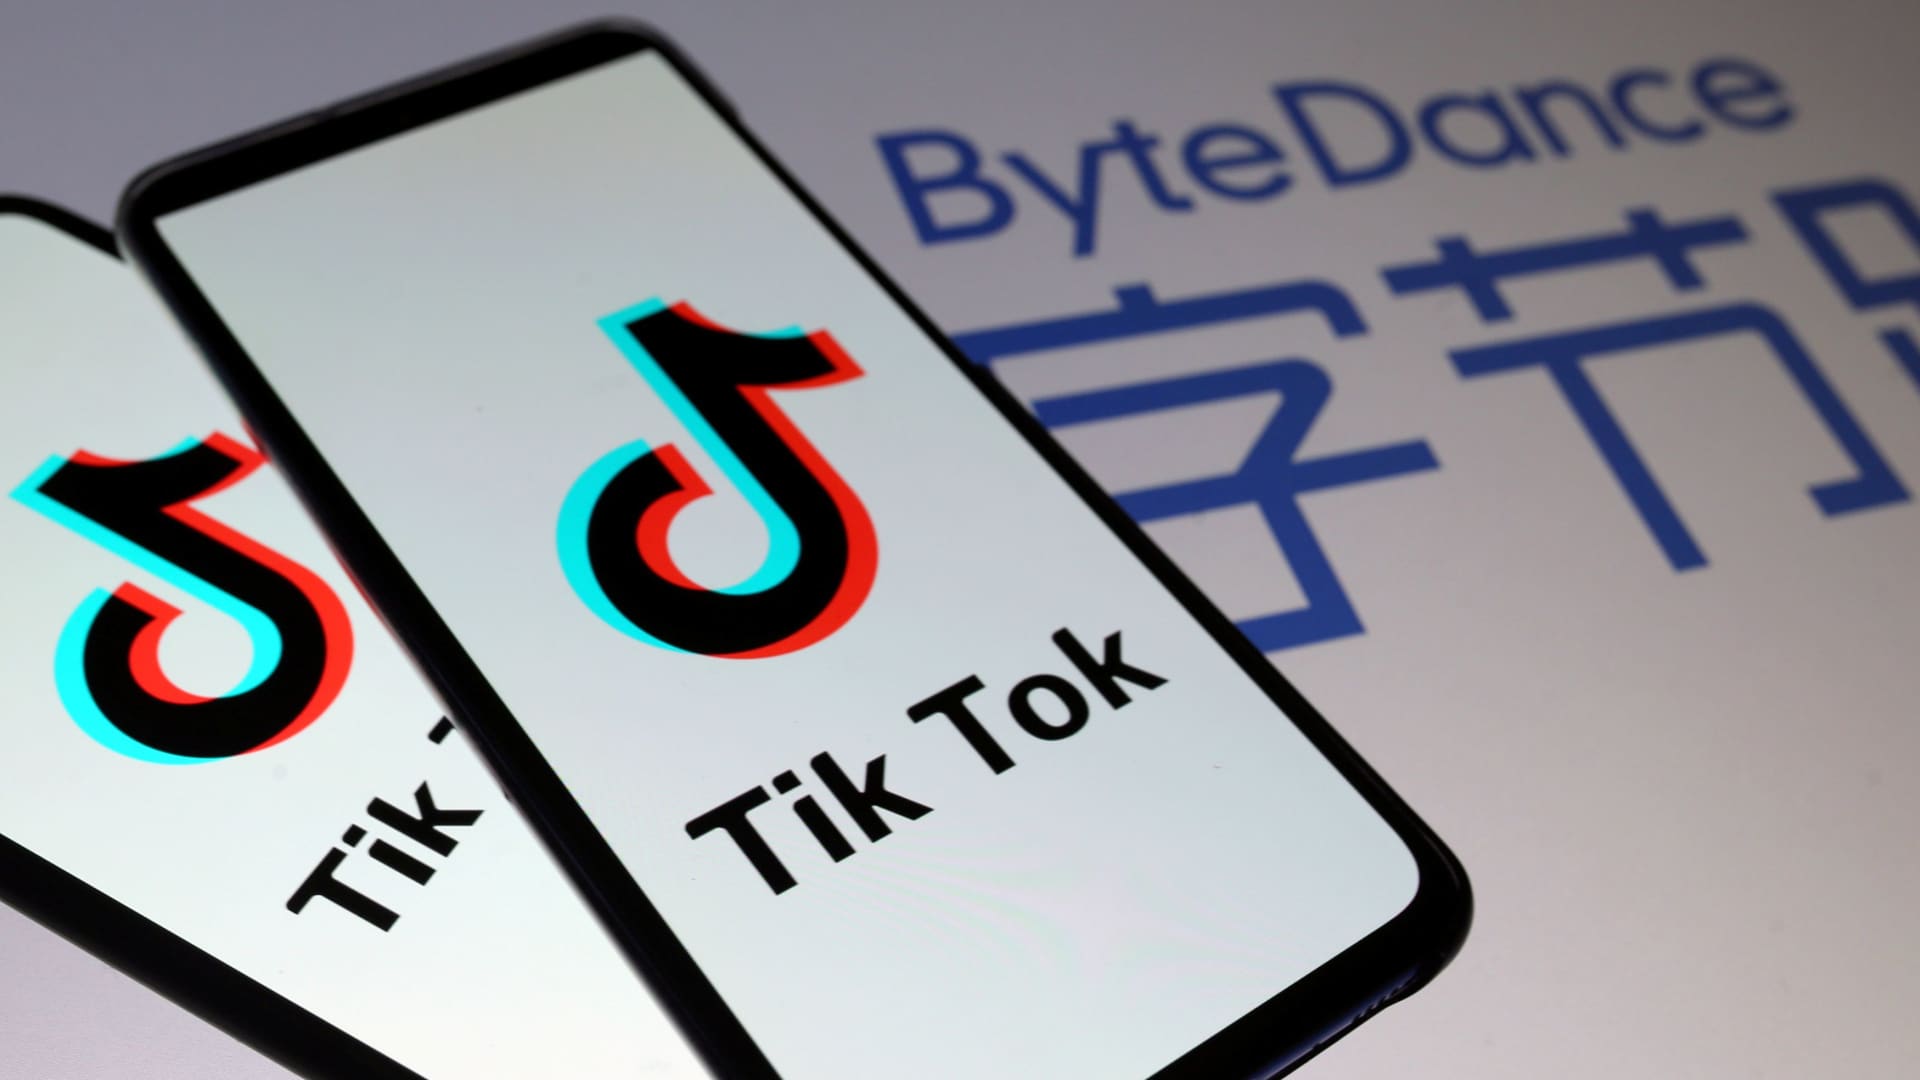 ByteDance has been given another week to sell off TikTok's U.S. business